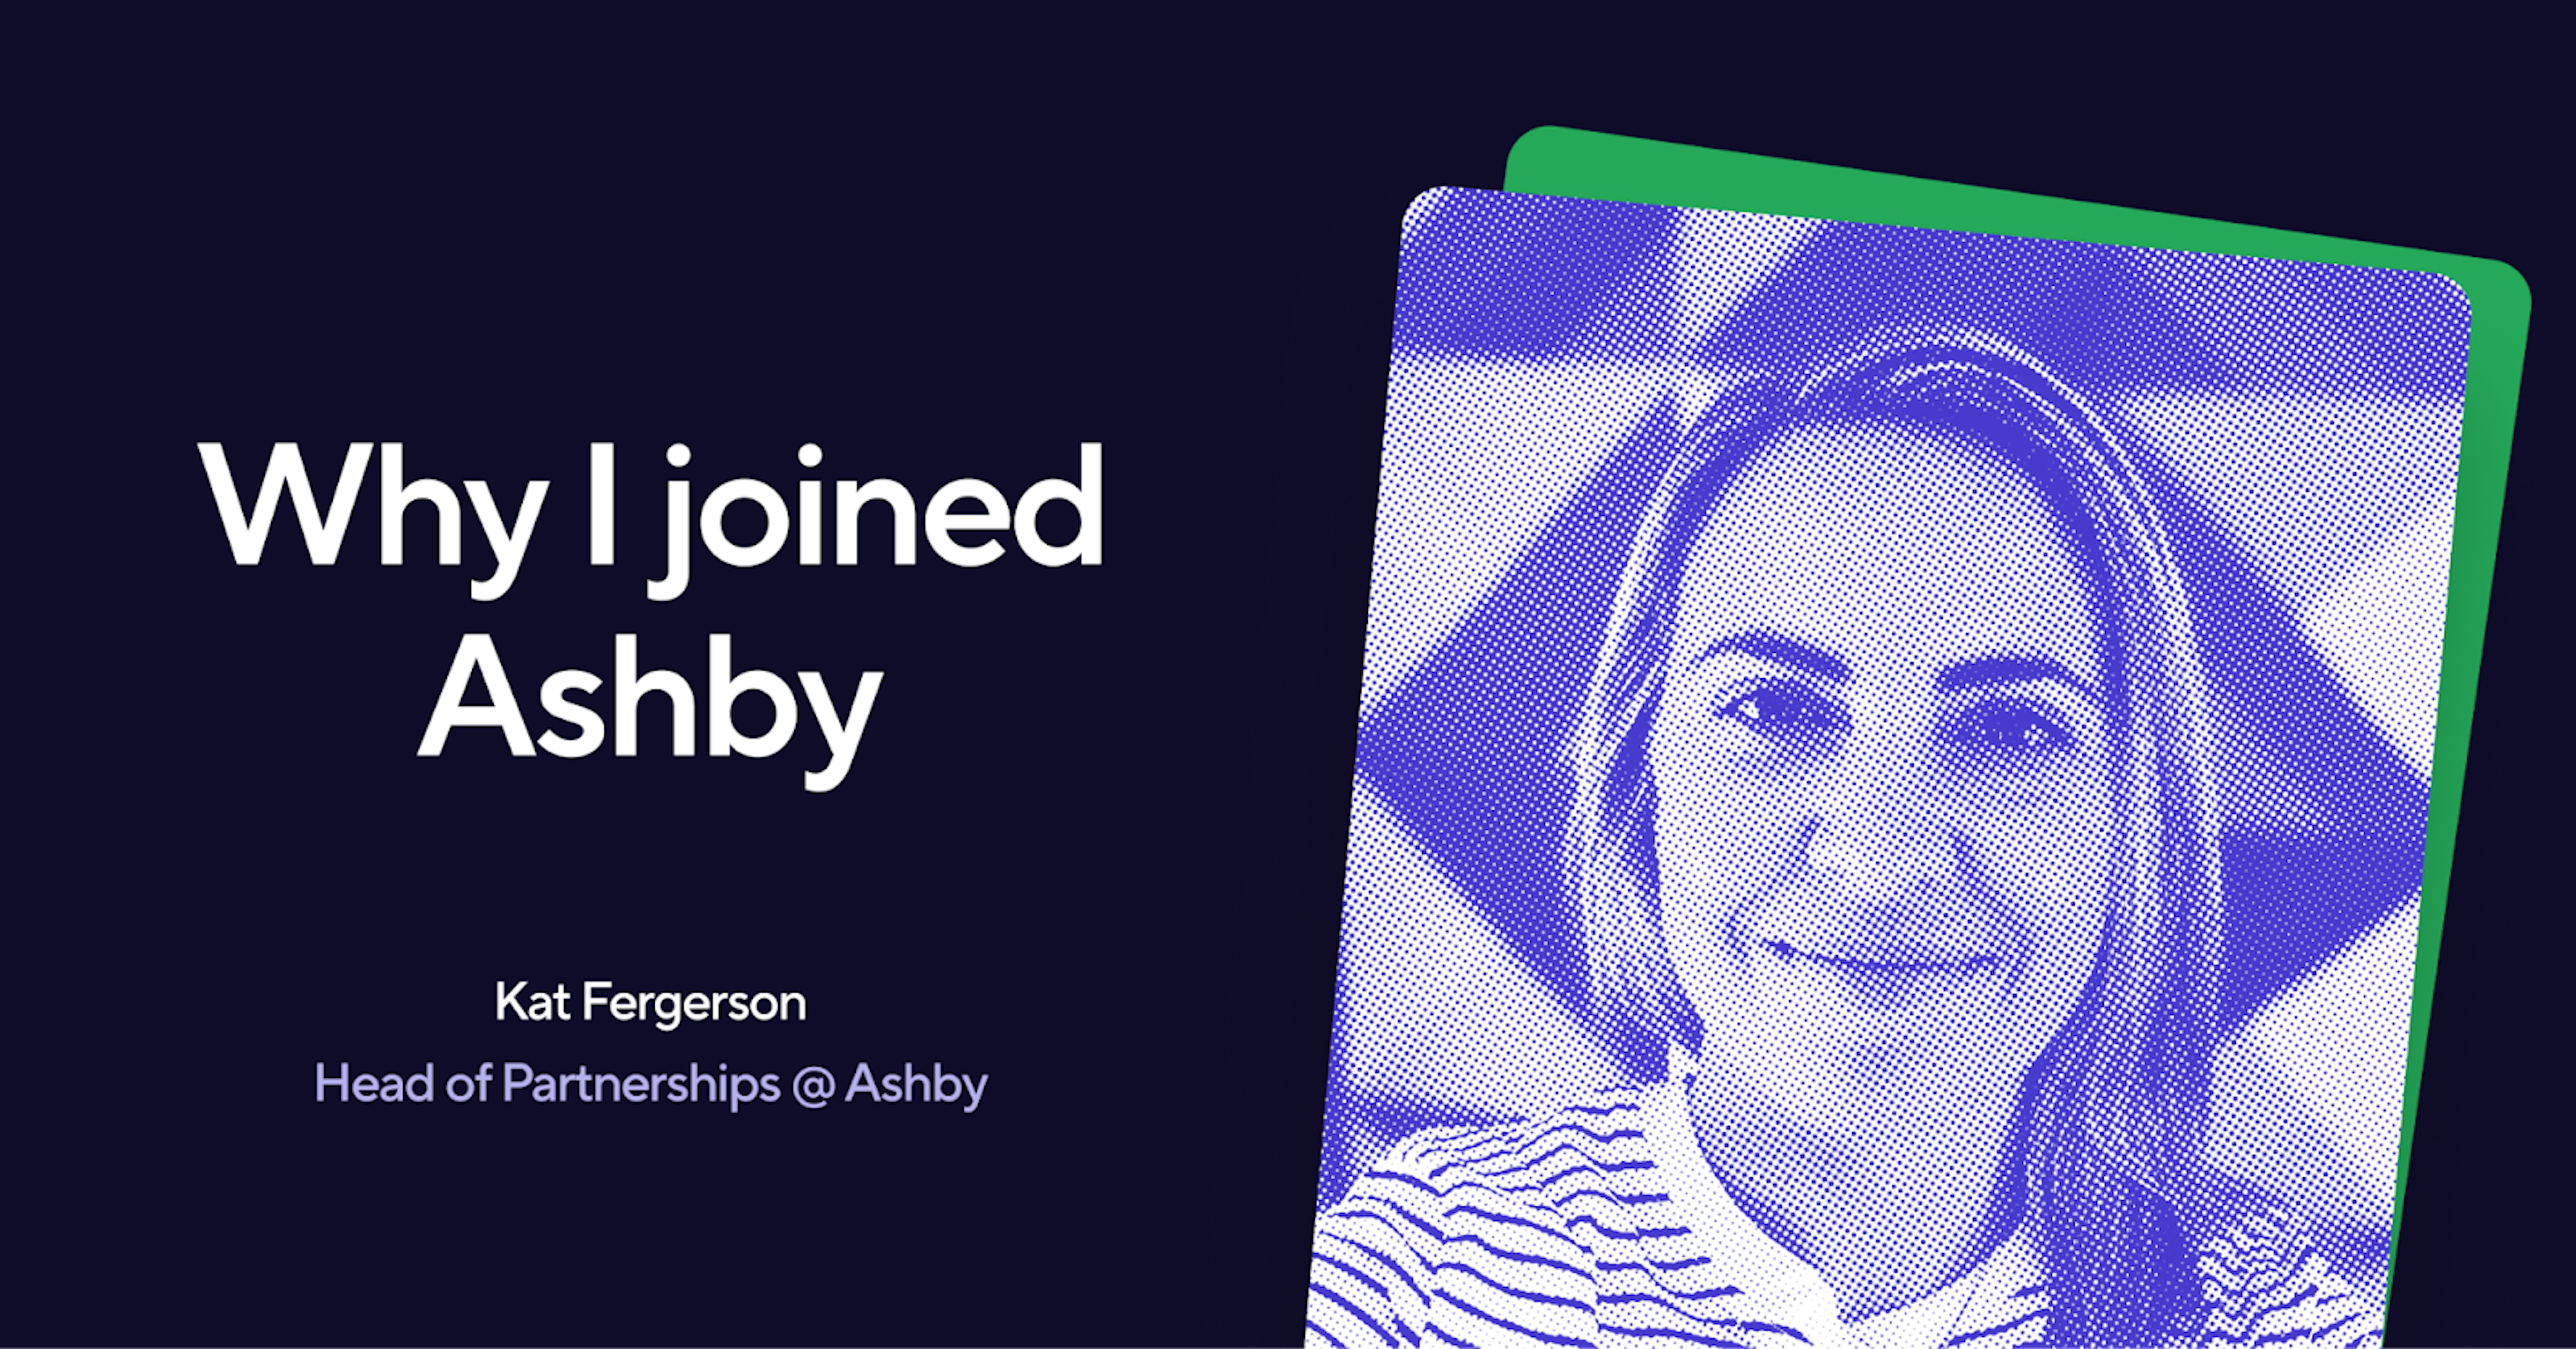 A Letter from Kat Fergerson on Joining Ashby